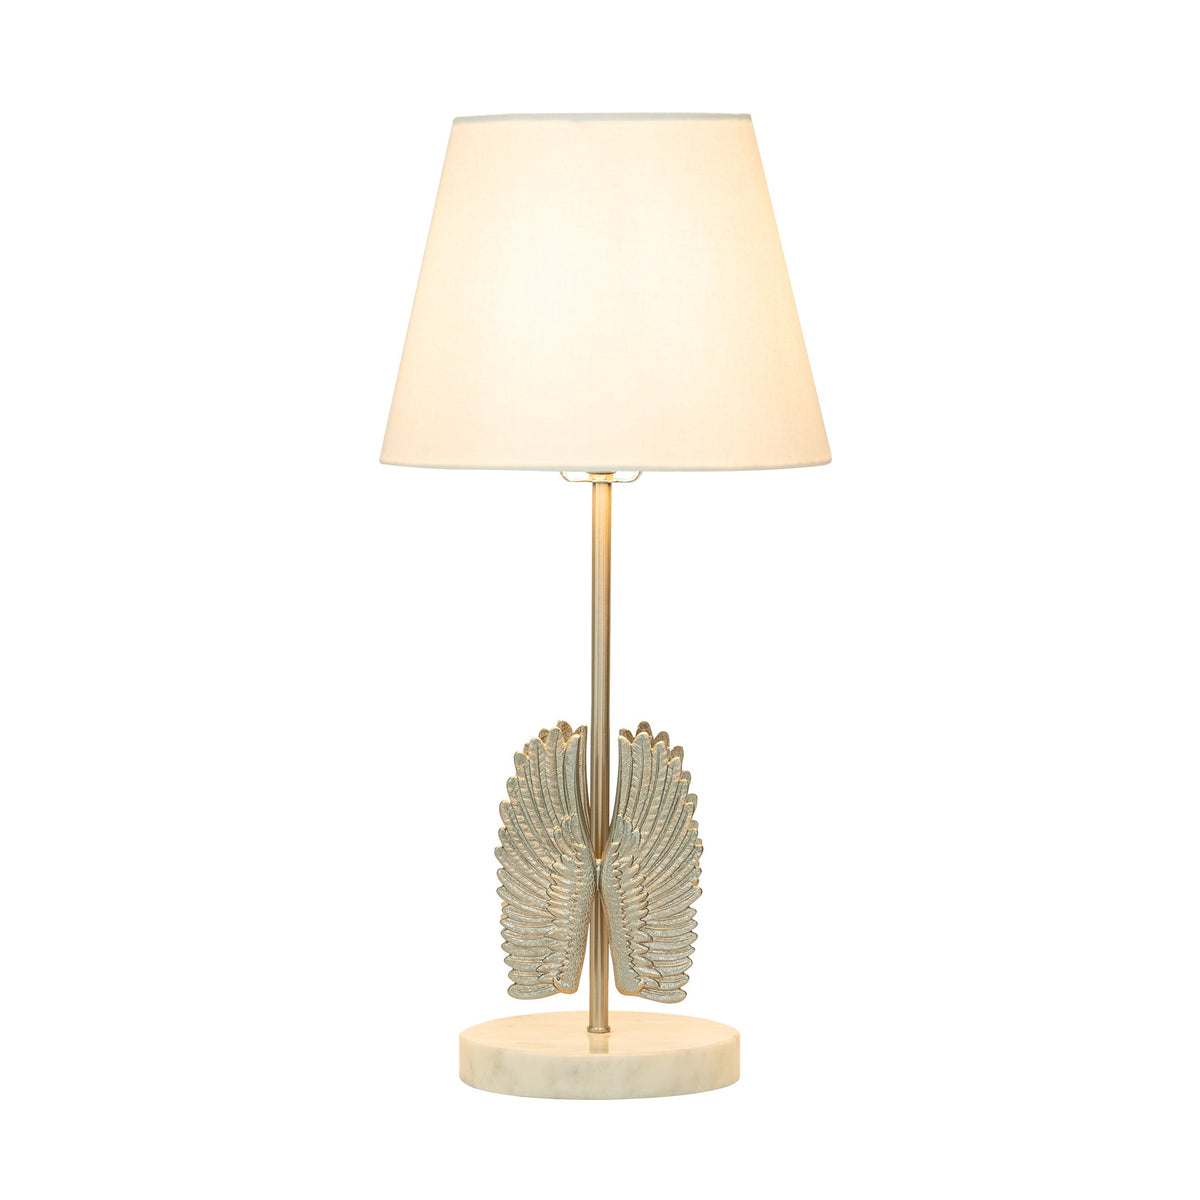 FEATHER TABLE LAMP WITH FABRIC SHADE NICKEL